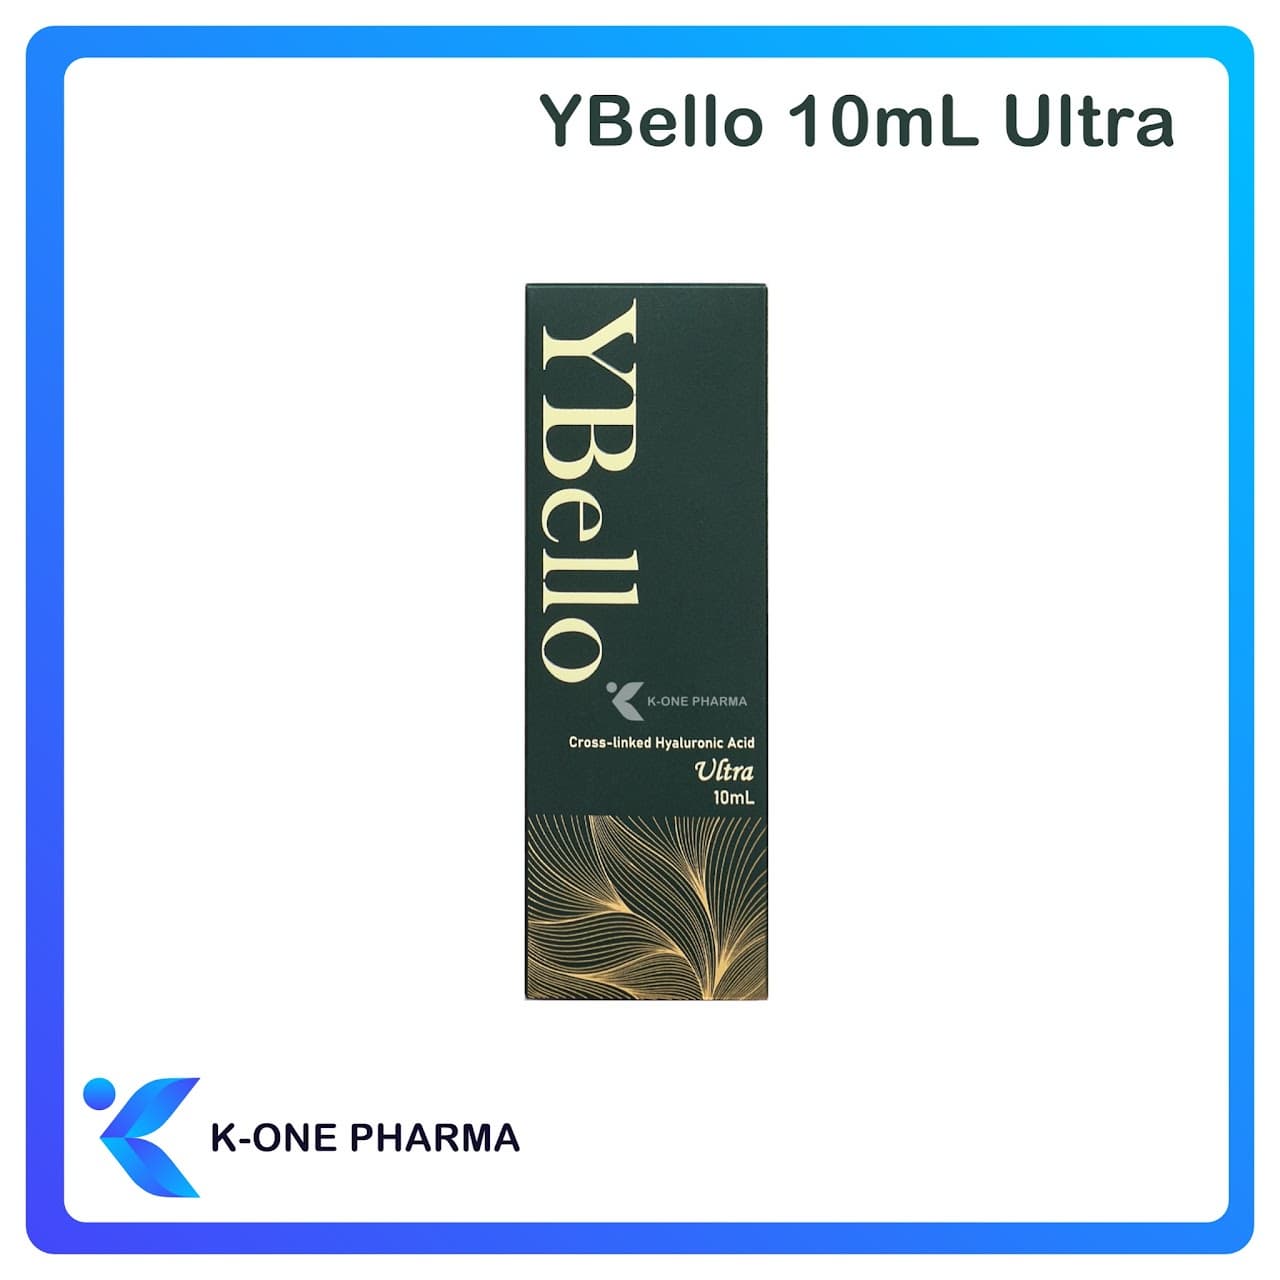 YBello 10mL Ultra Body Toning Body rejuvenation Smoothing skin Natural Appearance